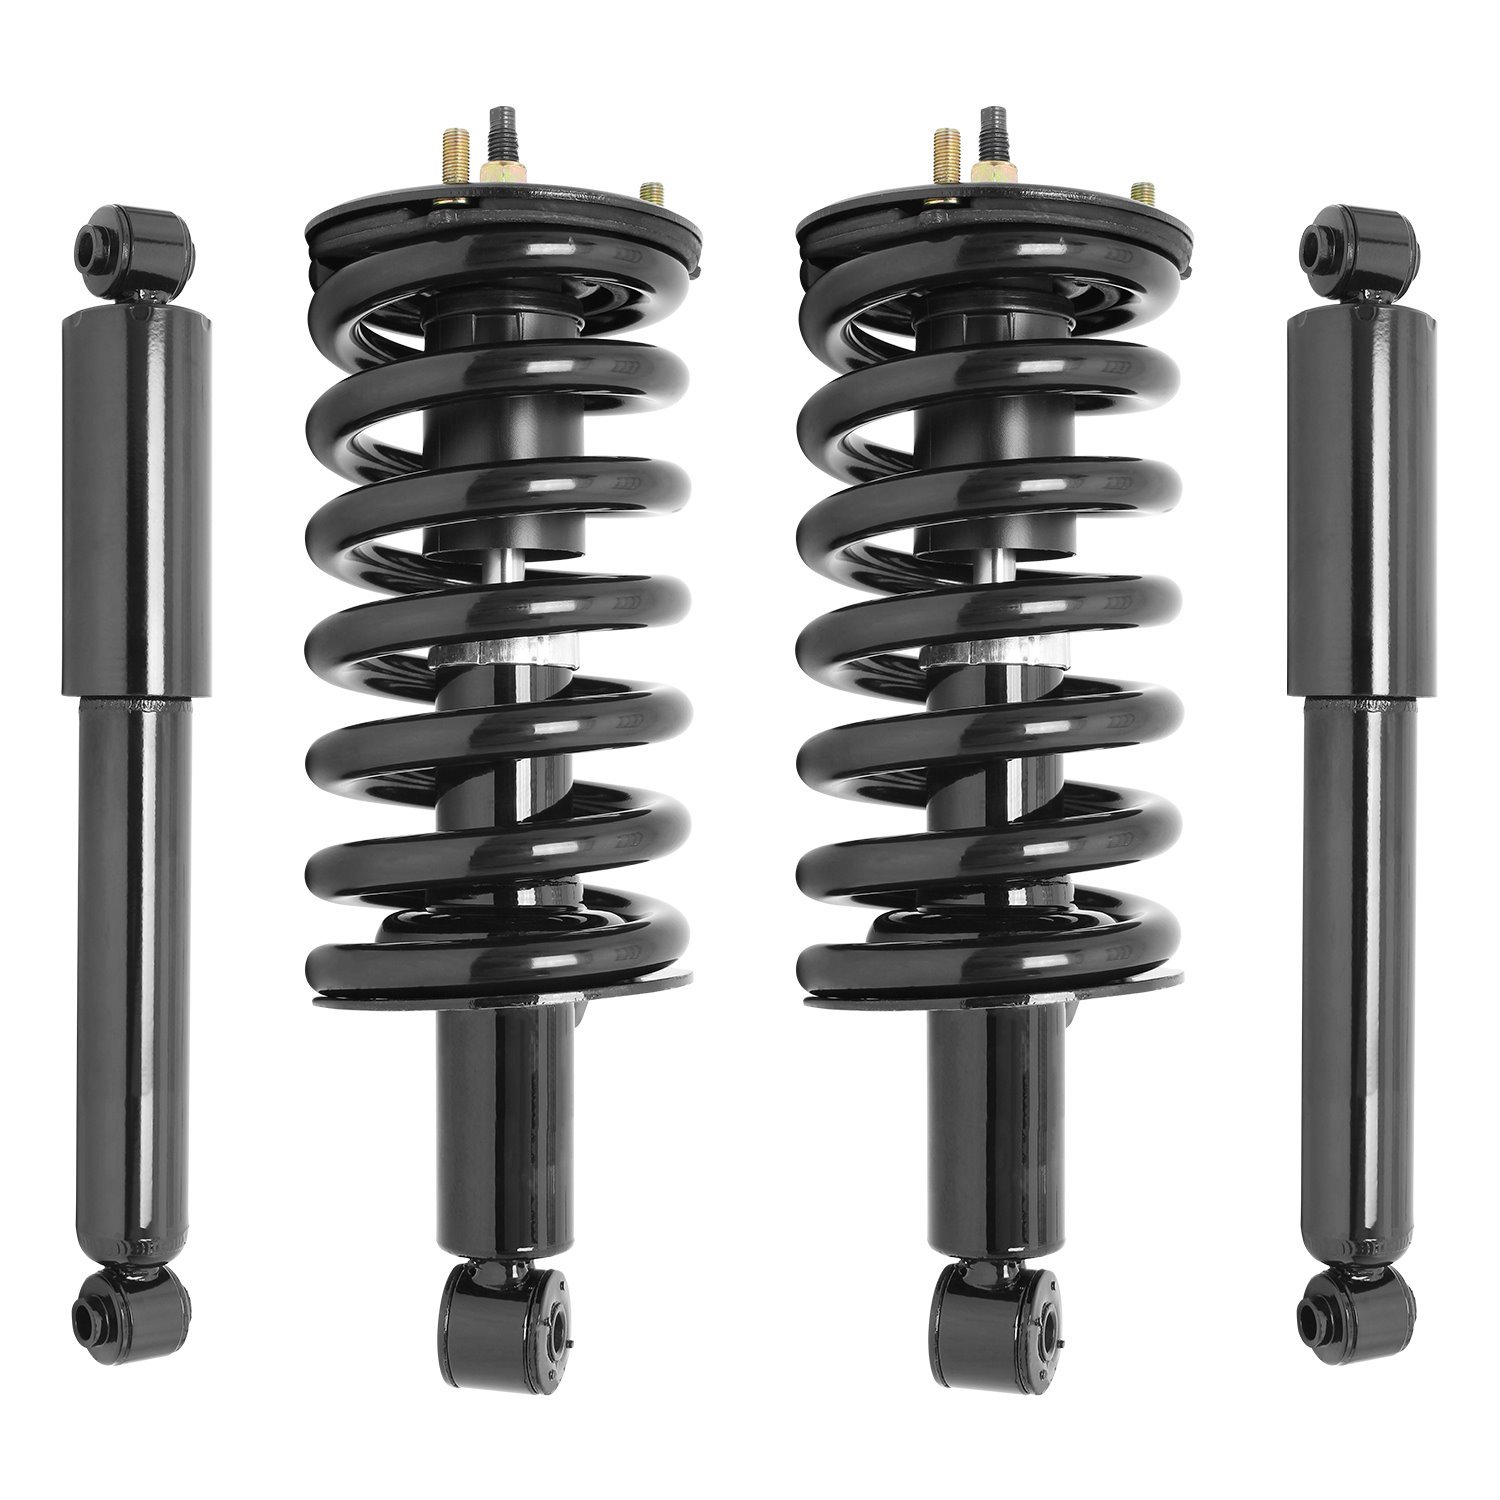 4-11302-255040-001 Front & Rear Suspension Strut & Coil Spring Assembly Fits Select Nissan Pathfinder Armada, Nissan Armada